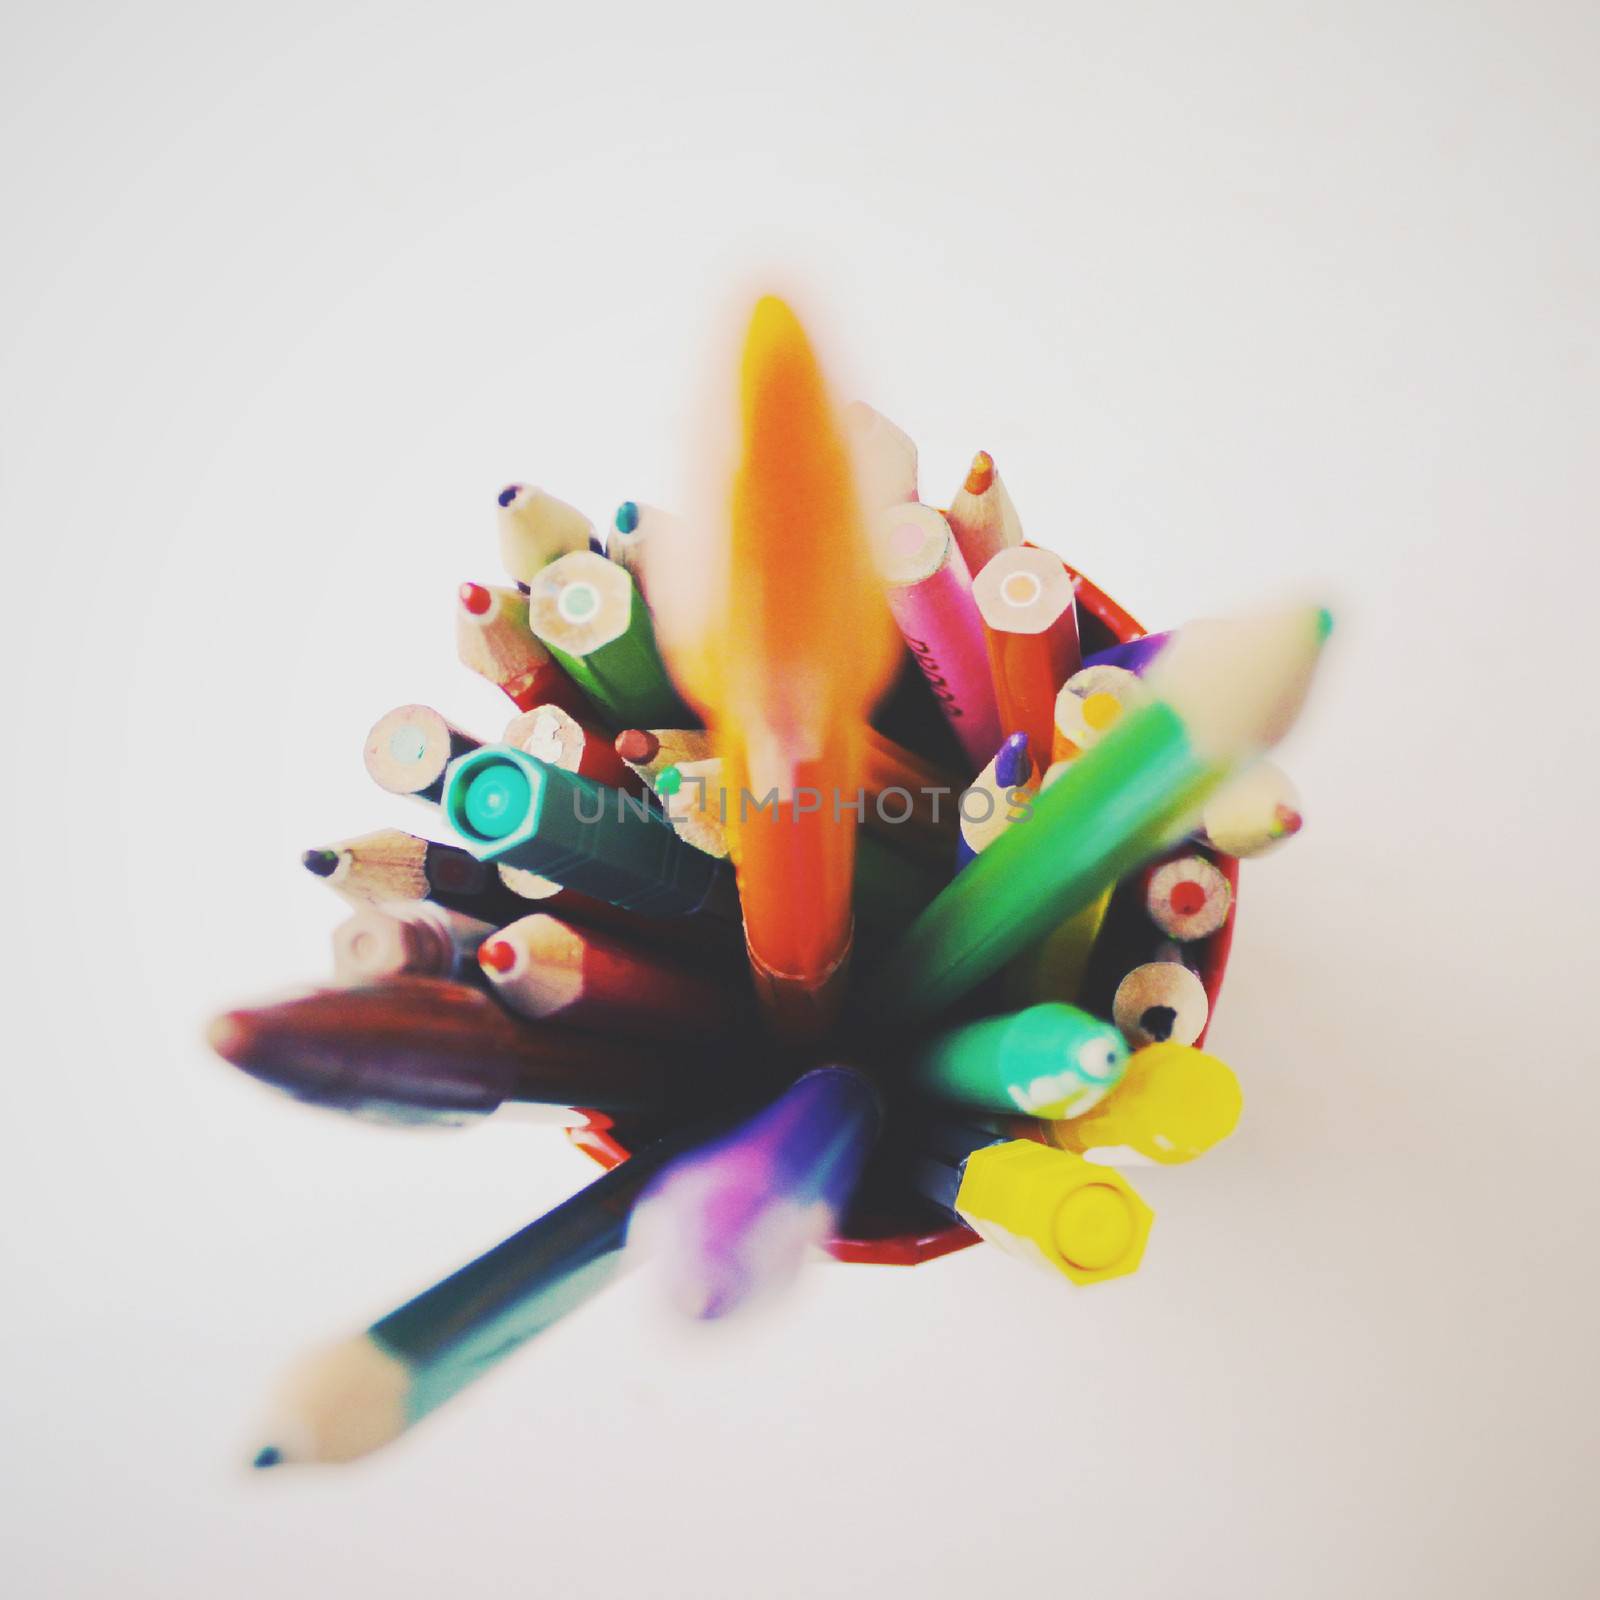 Group of crayons and pens with retro filter effect